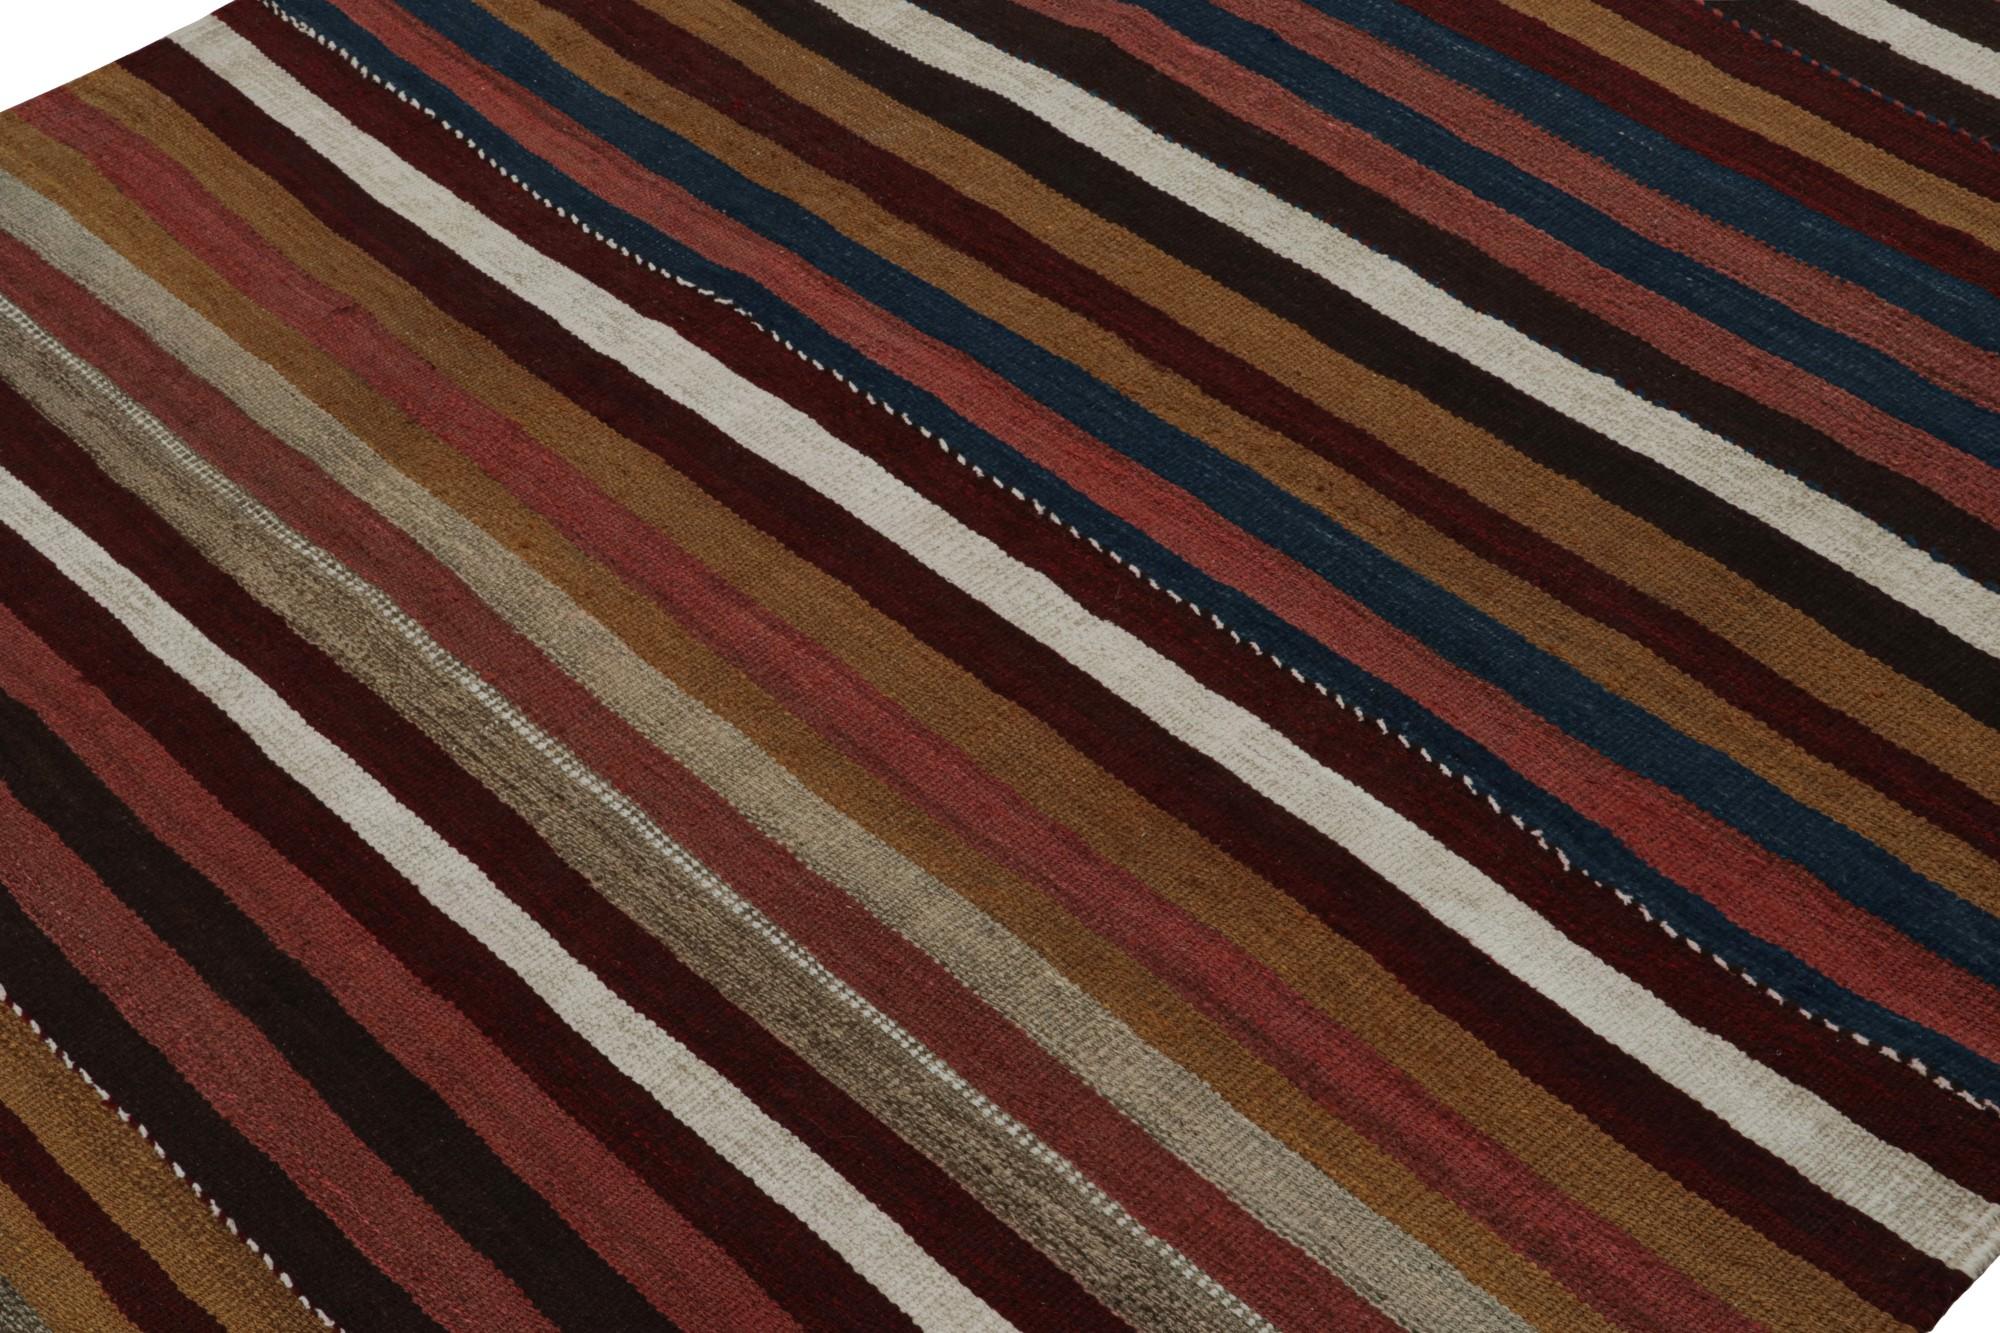 Vintage Afghan Tribal Kilim Rug with Colorful Stripes, from Rug & Kilim  In Good Condition For Sale In Long Island City, NY